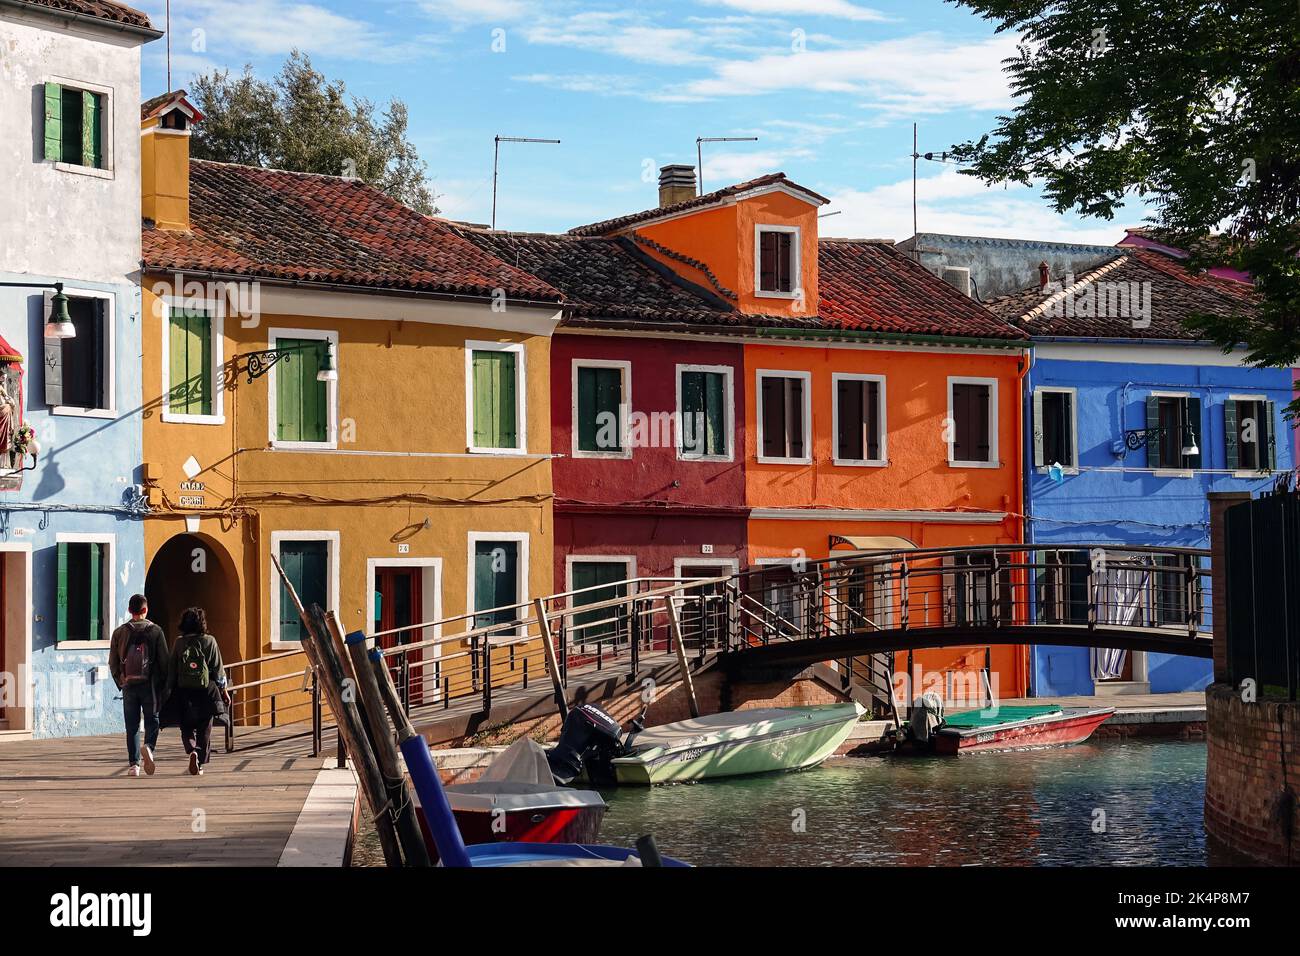 The island of Burano. Burano is one of the islands of Venice, famous for its colorful houses. Burano, Venice - October 2022 Stock Photo